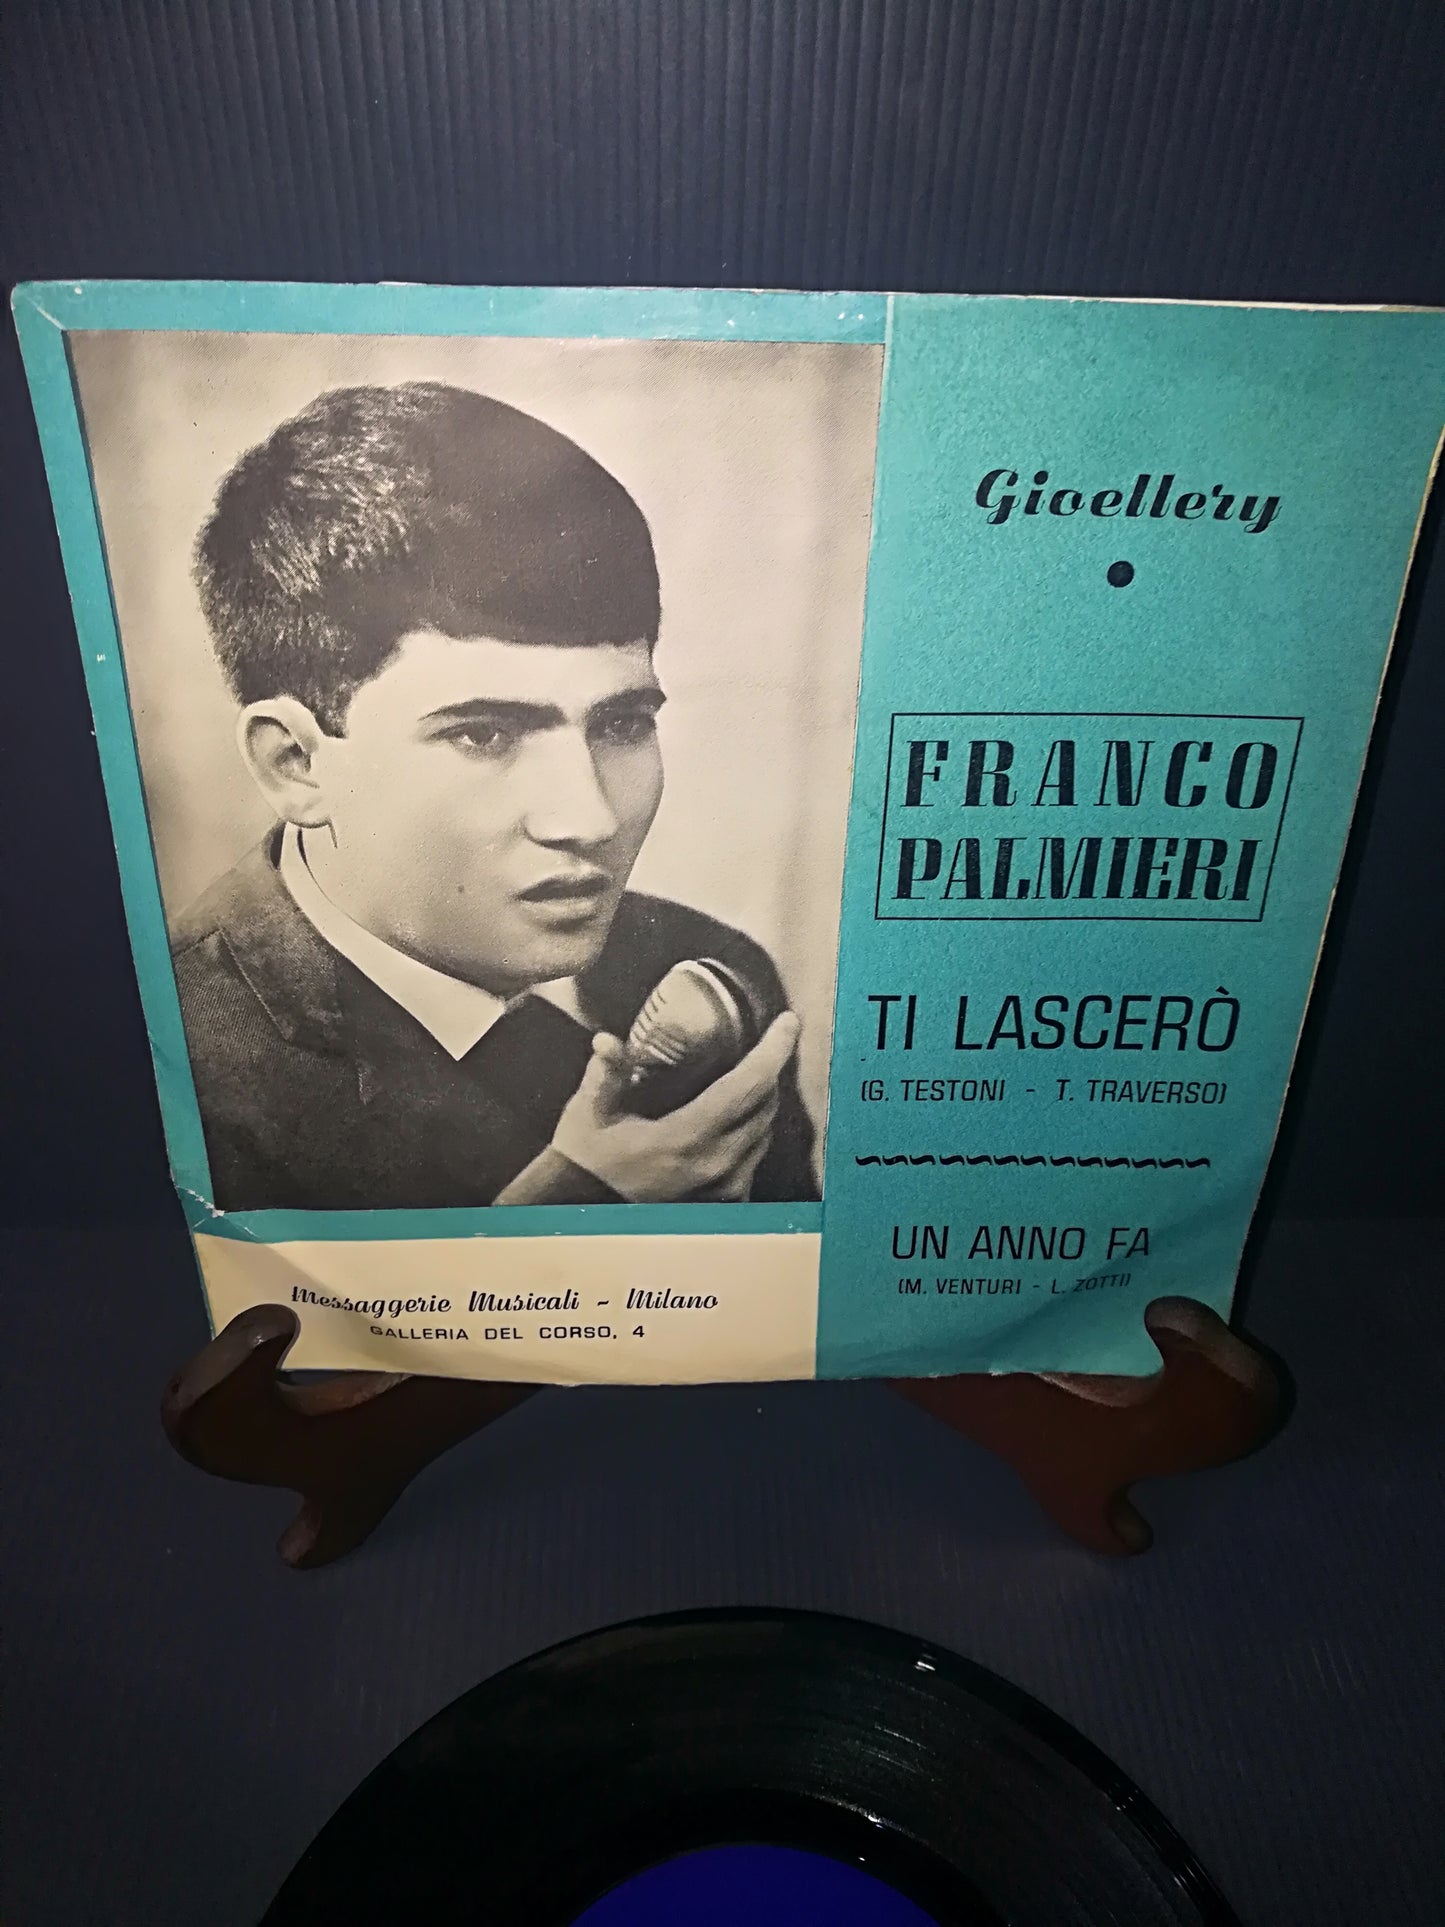 One Year Ago/I'll ​​Leave You" Franco Palmieri 45 Laps

 Published by Gioellery